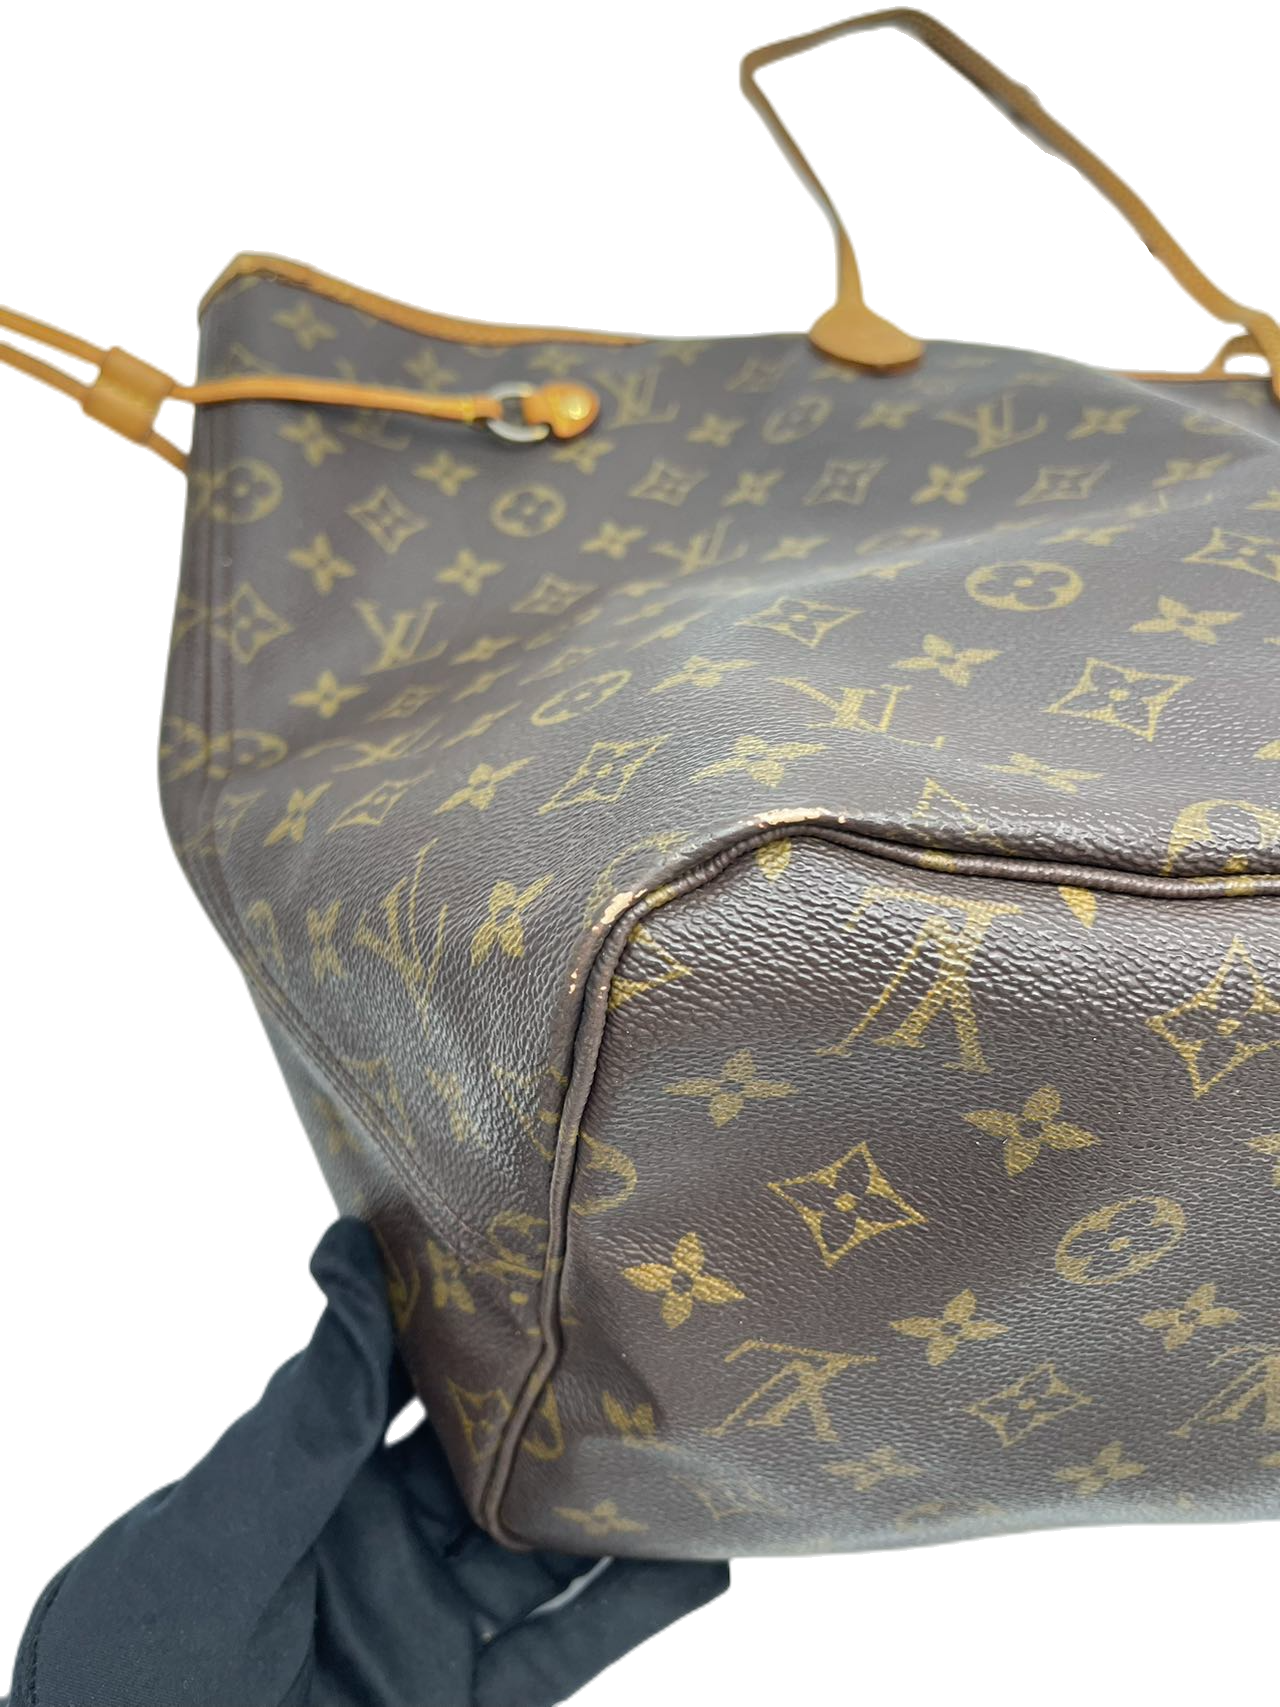 Preloved Louis Vuitton Monogram Canvas NeverFull Totes